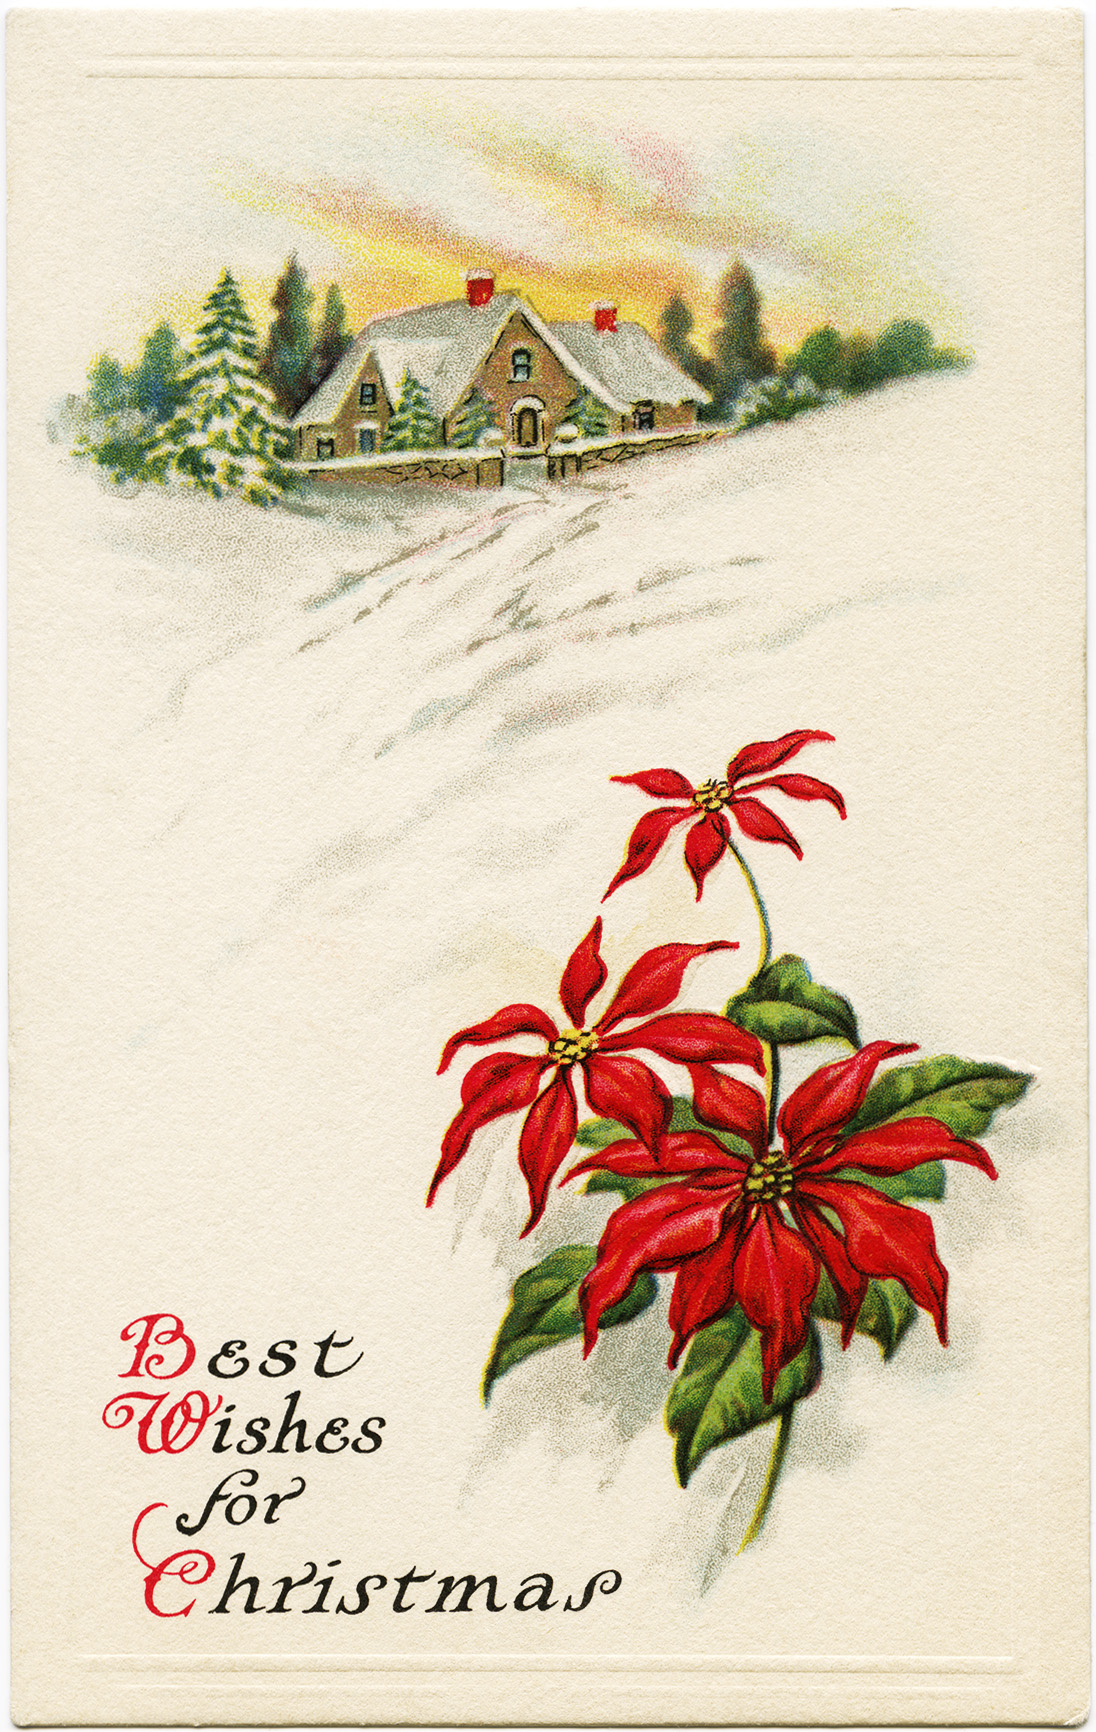 Christmas vintage postcard, poinsettia illustration, country winter scene, old fashioned Christmas card, free holiday graphic